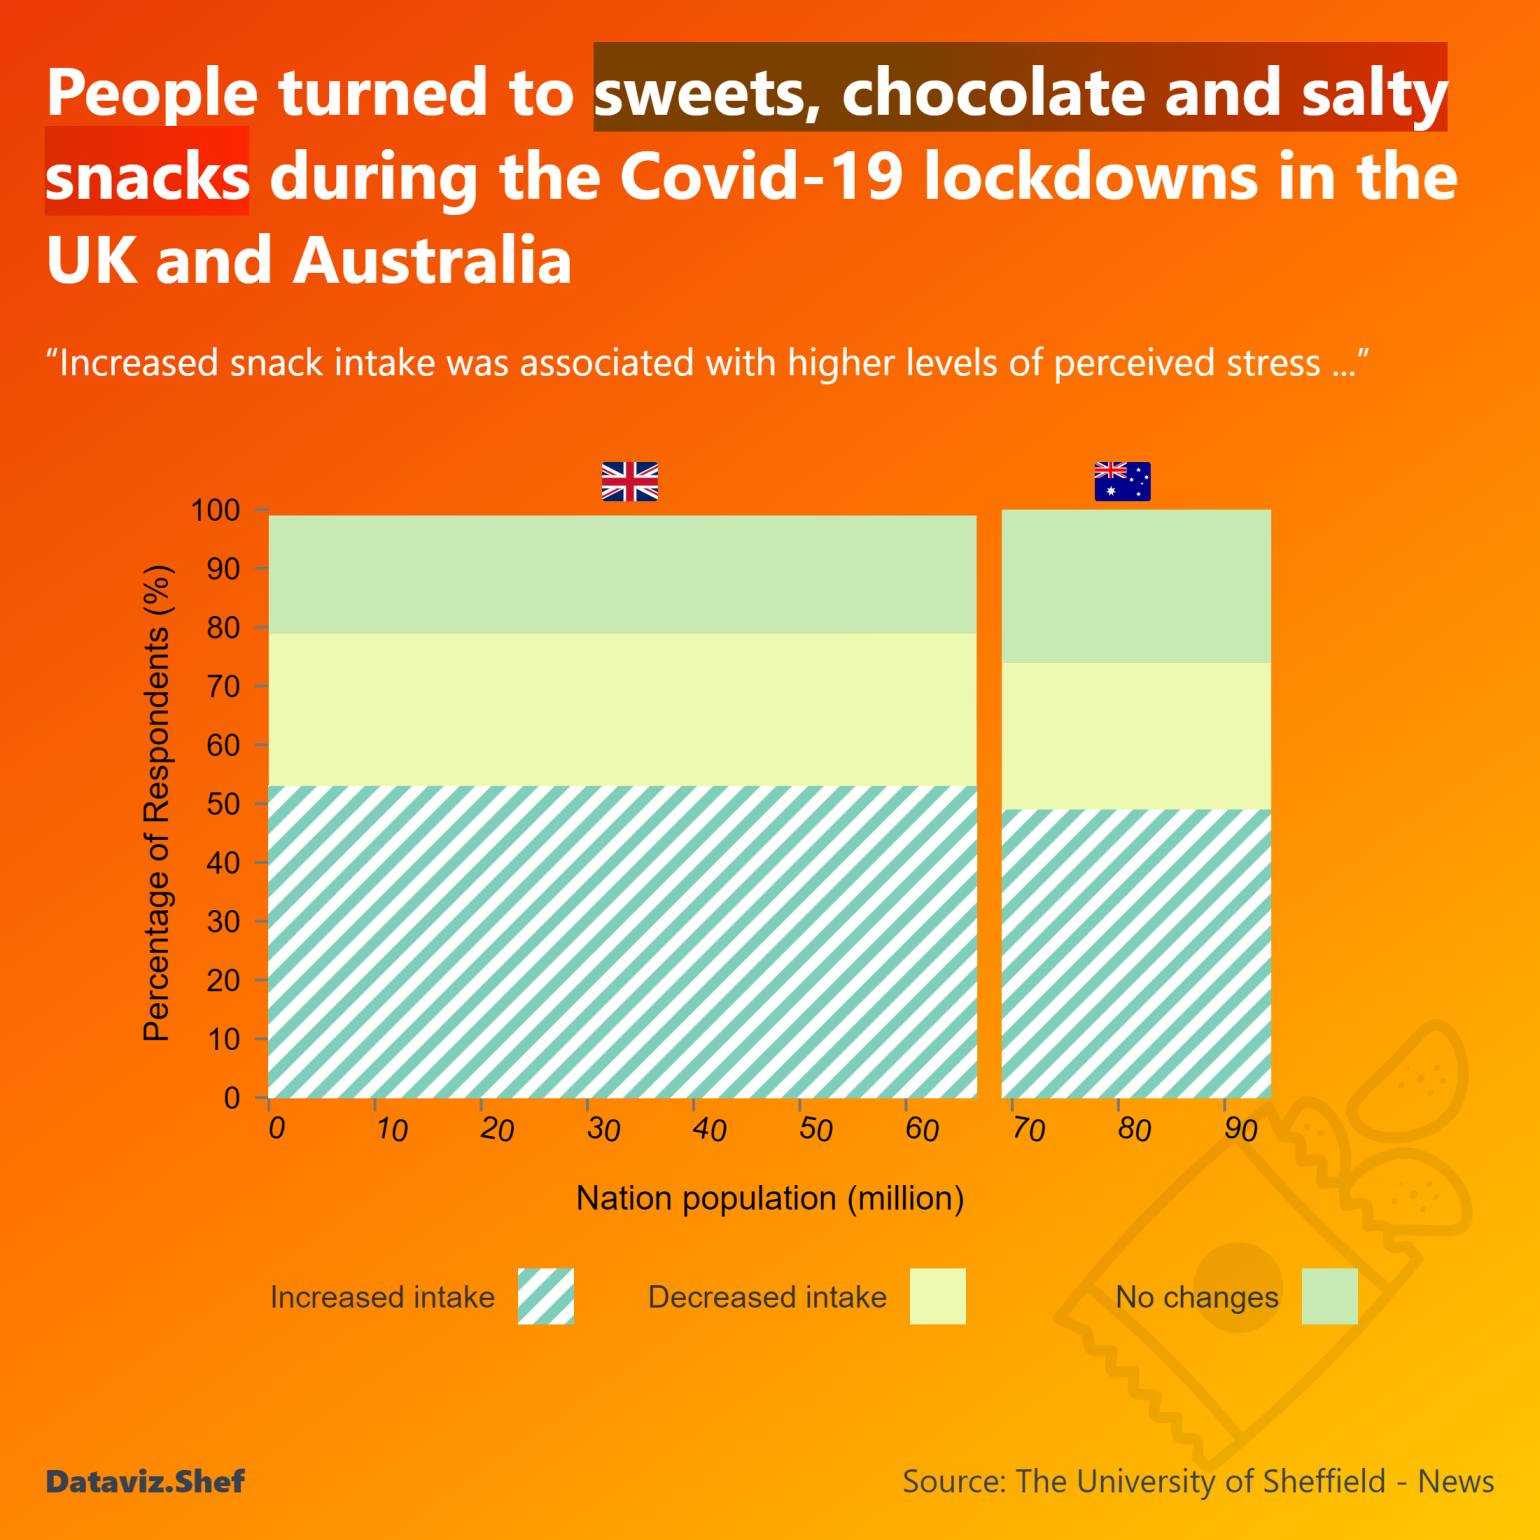 Visualisation: People turned to sweets, chocolate and salty snacks during the Covid-19 lockdowns in the UK and Australia